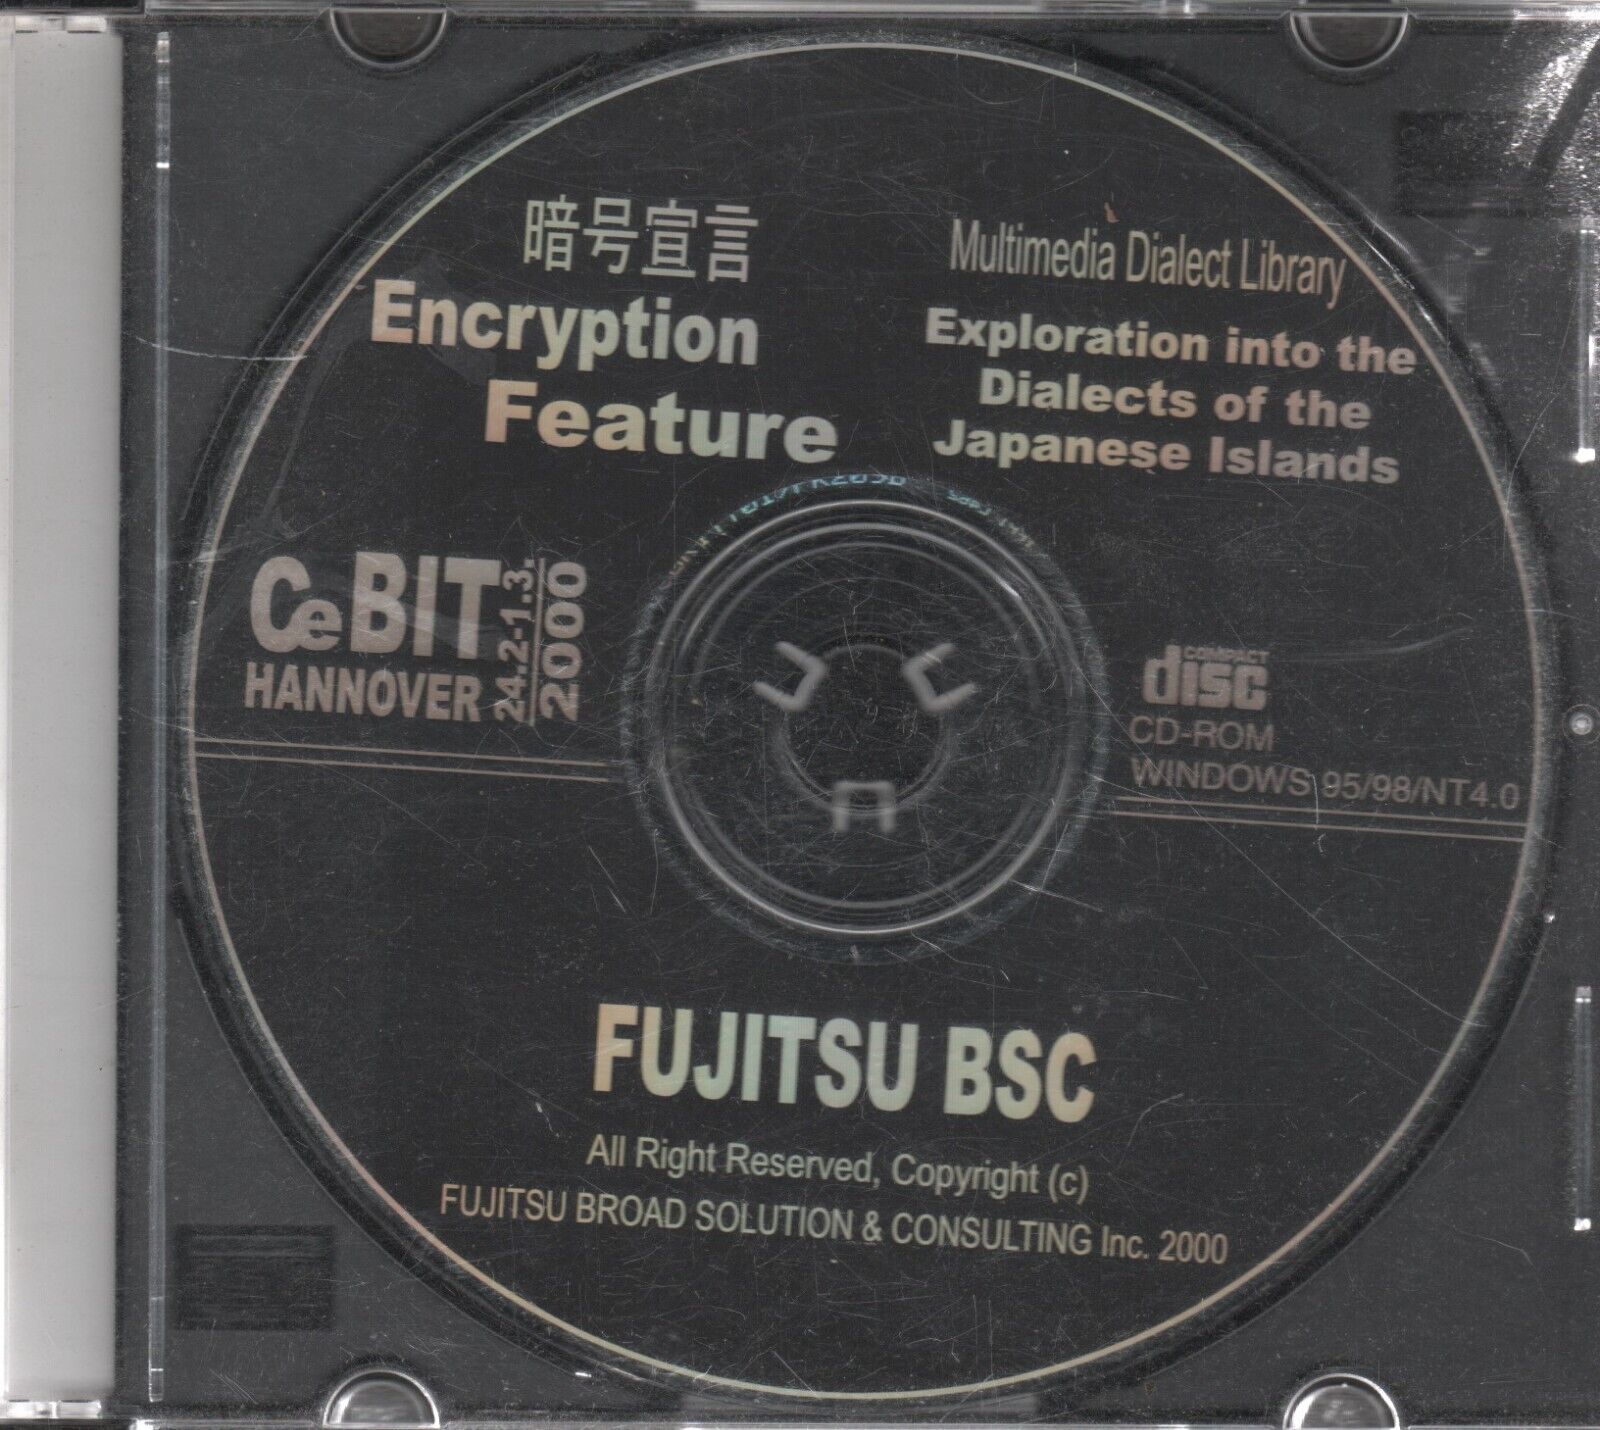 ITHistory (2000) IBM Software: FUJITSU BSC CeBIT Encryption Feature/ Dialects